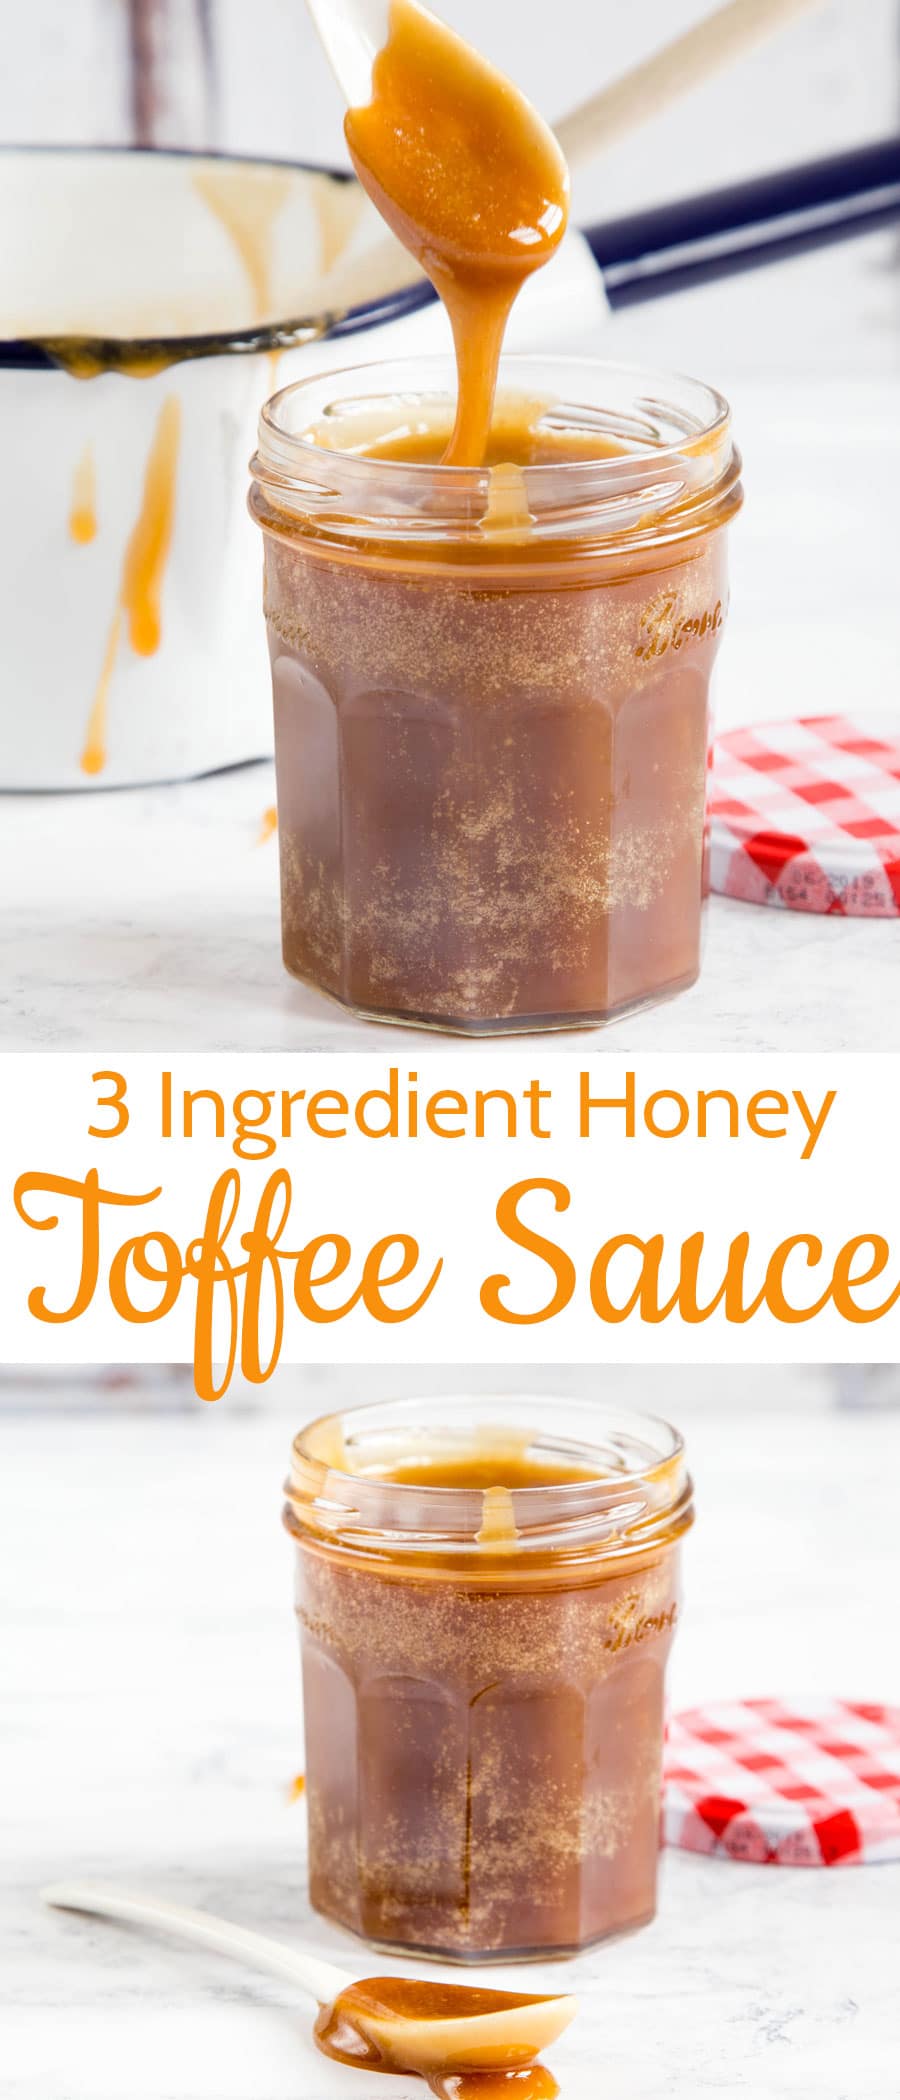 Delicious, indulgent and easy three ingredient caramel toffee sauce with honey recipe will become a staple. Enjoy it in so many ways, or just spoon it from the jar.